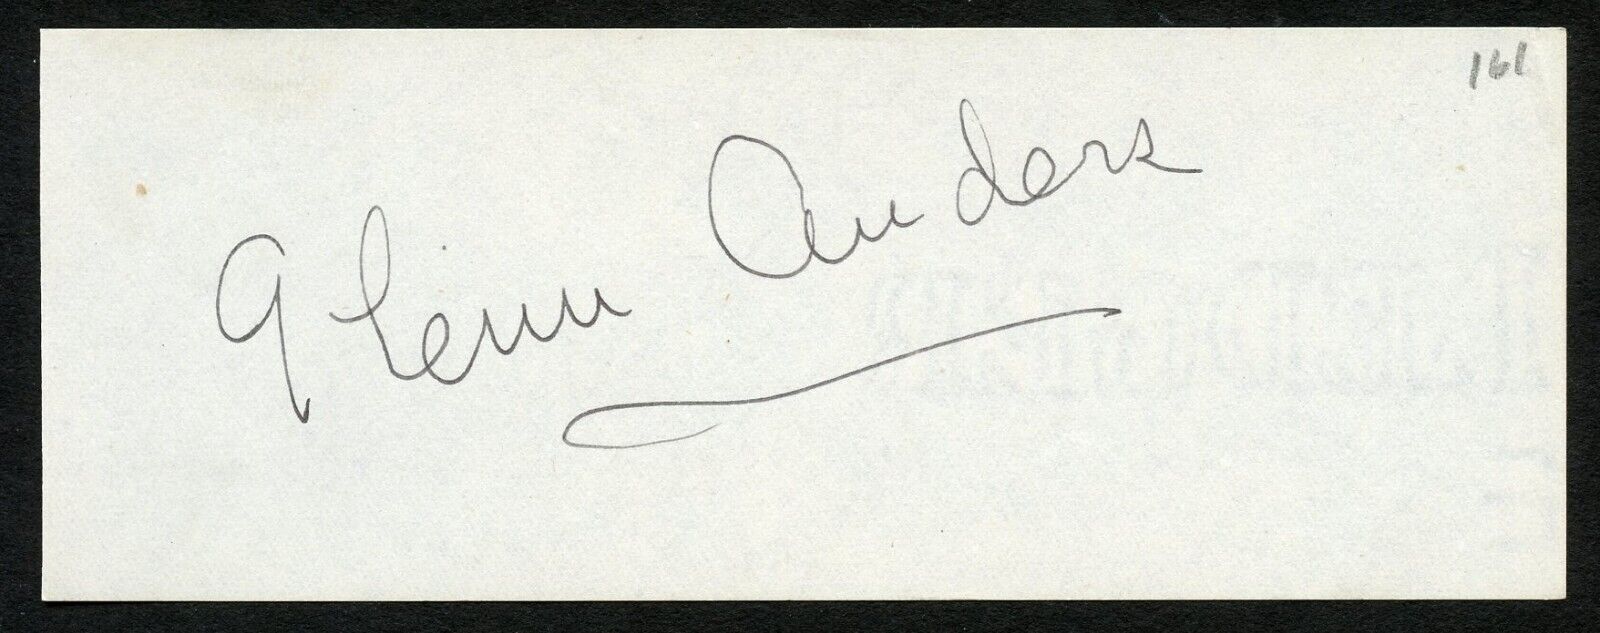 Glenn Anders d1981 signed autograph auto 2x5 cut Actor The Lady from Shanghai